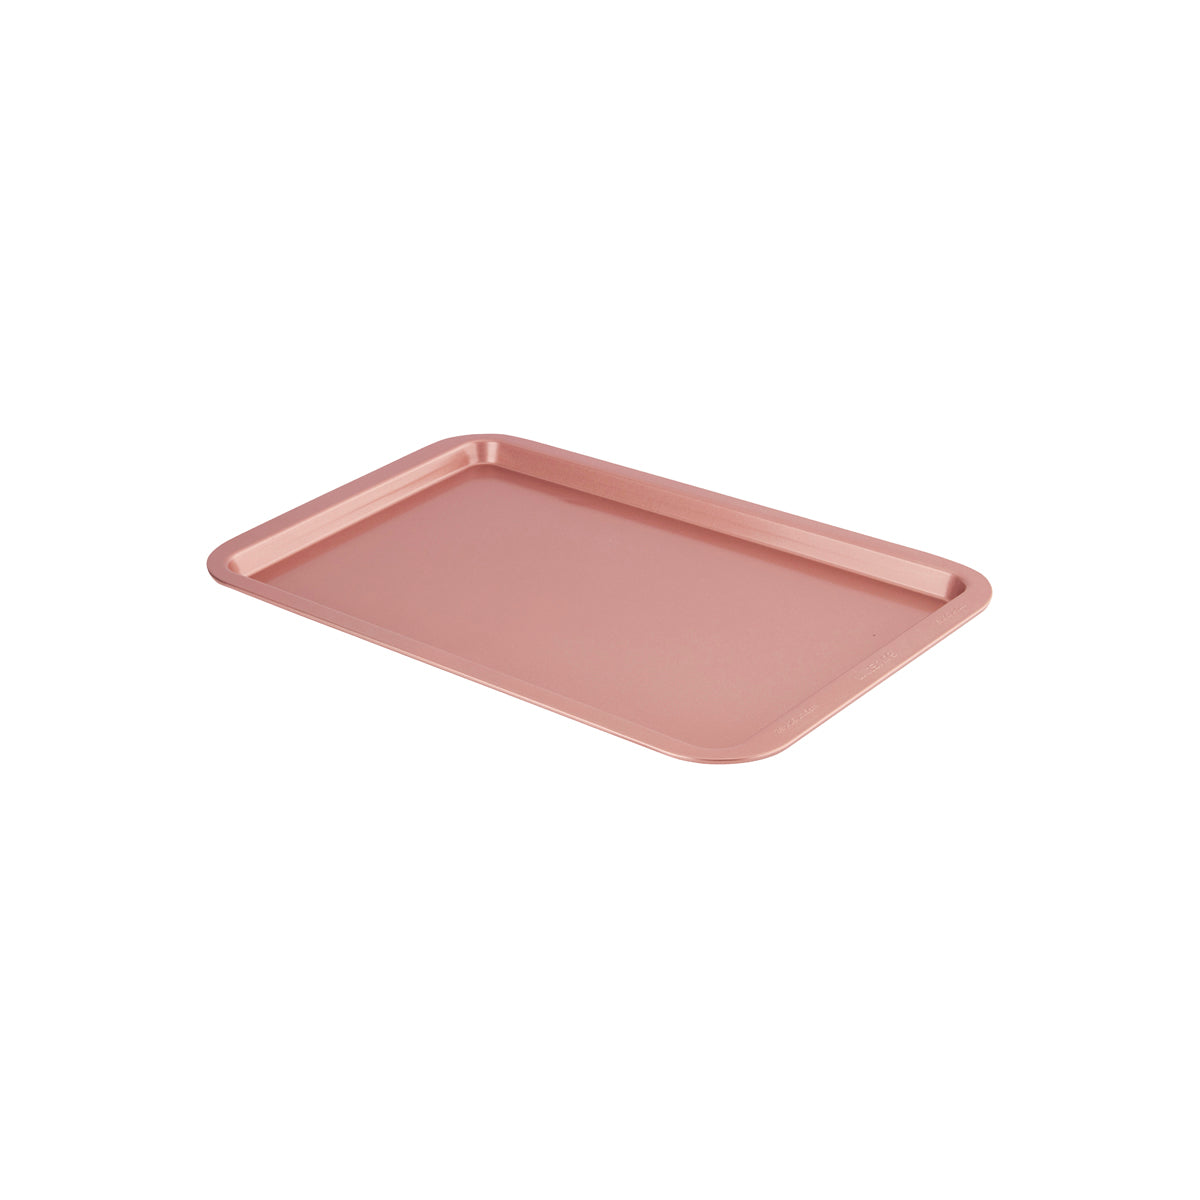 WLT40759 Wiltshire Rose Gold Cookie Sheet 390mm Tomkin Australia Hospitality Supplies